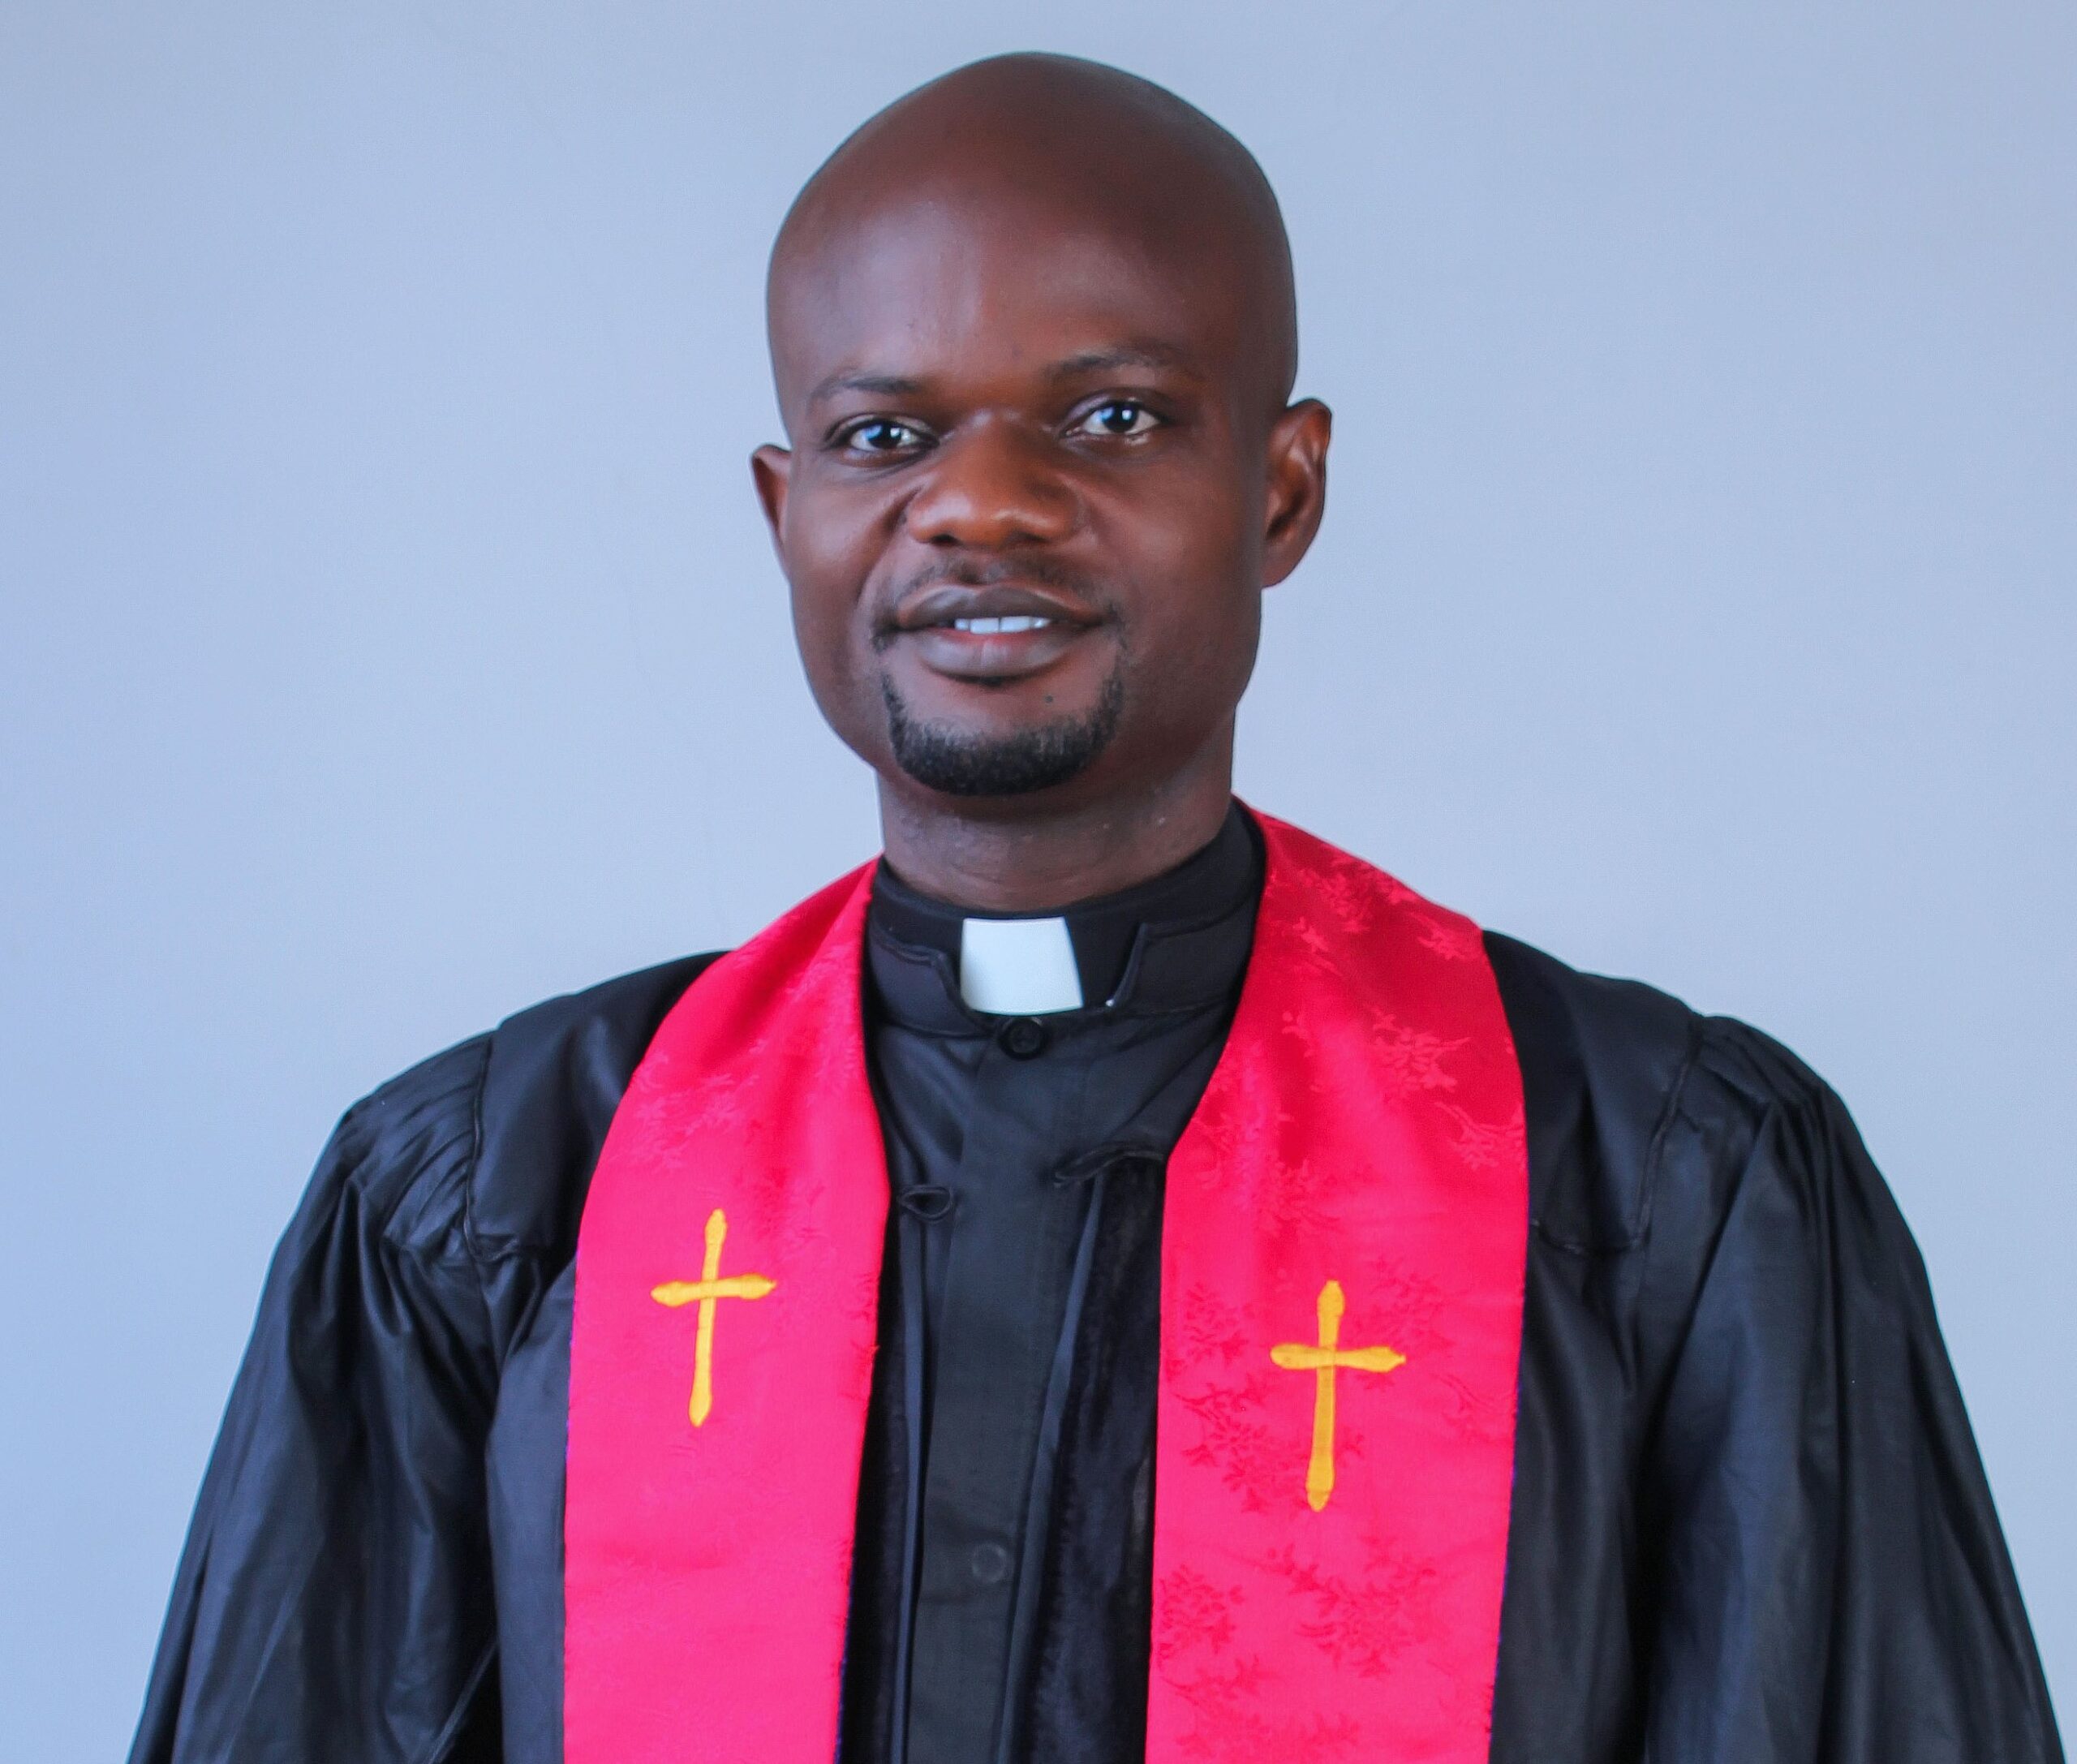 I Got Holy Ghost Baptism in Scripture Union, Says Rev. Chima on Ordination